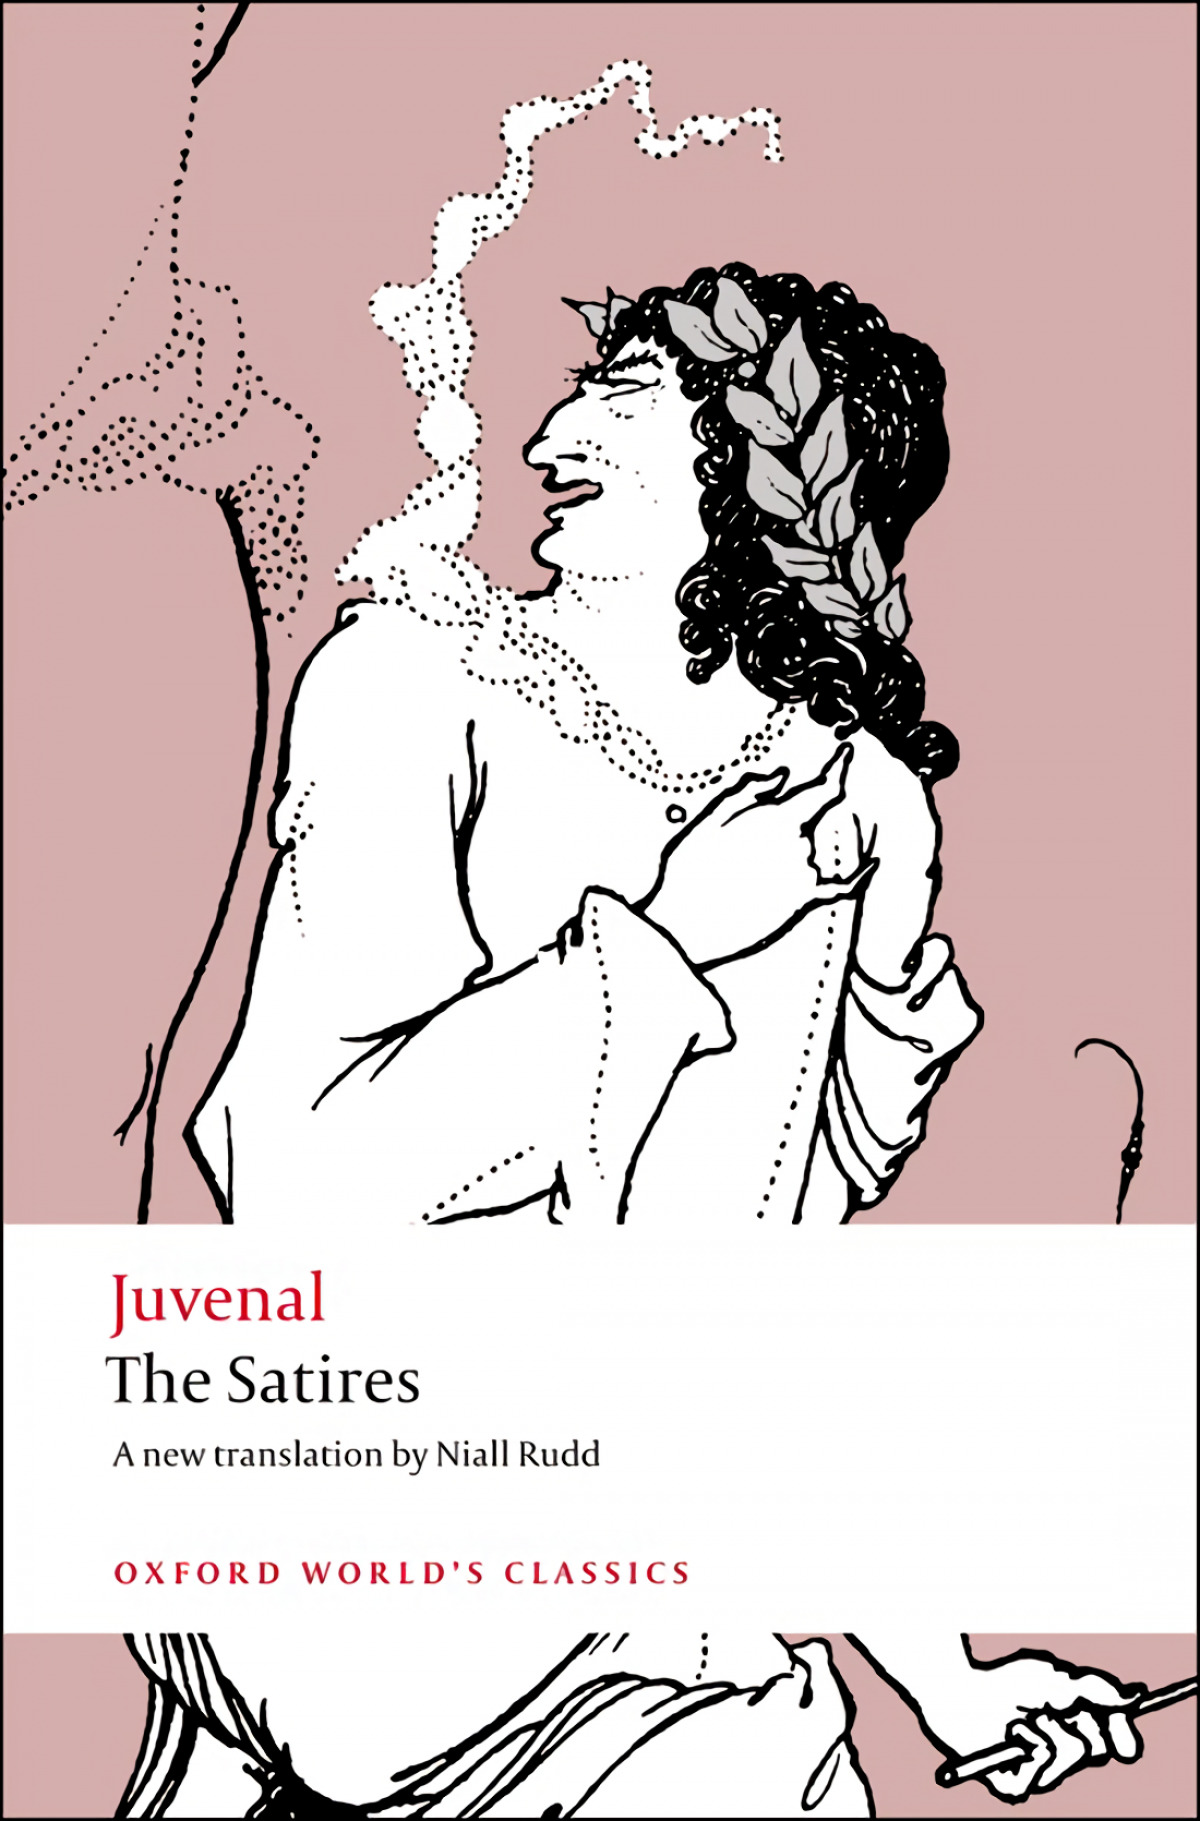 Oxford Worlds Classics: The Satires - Juvenal